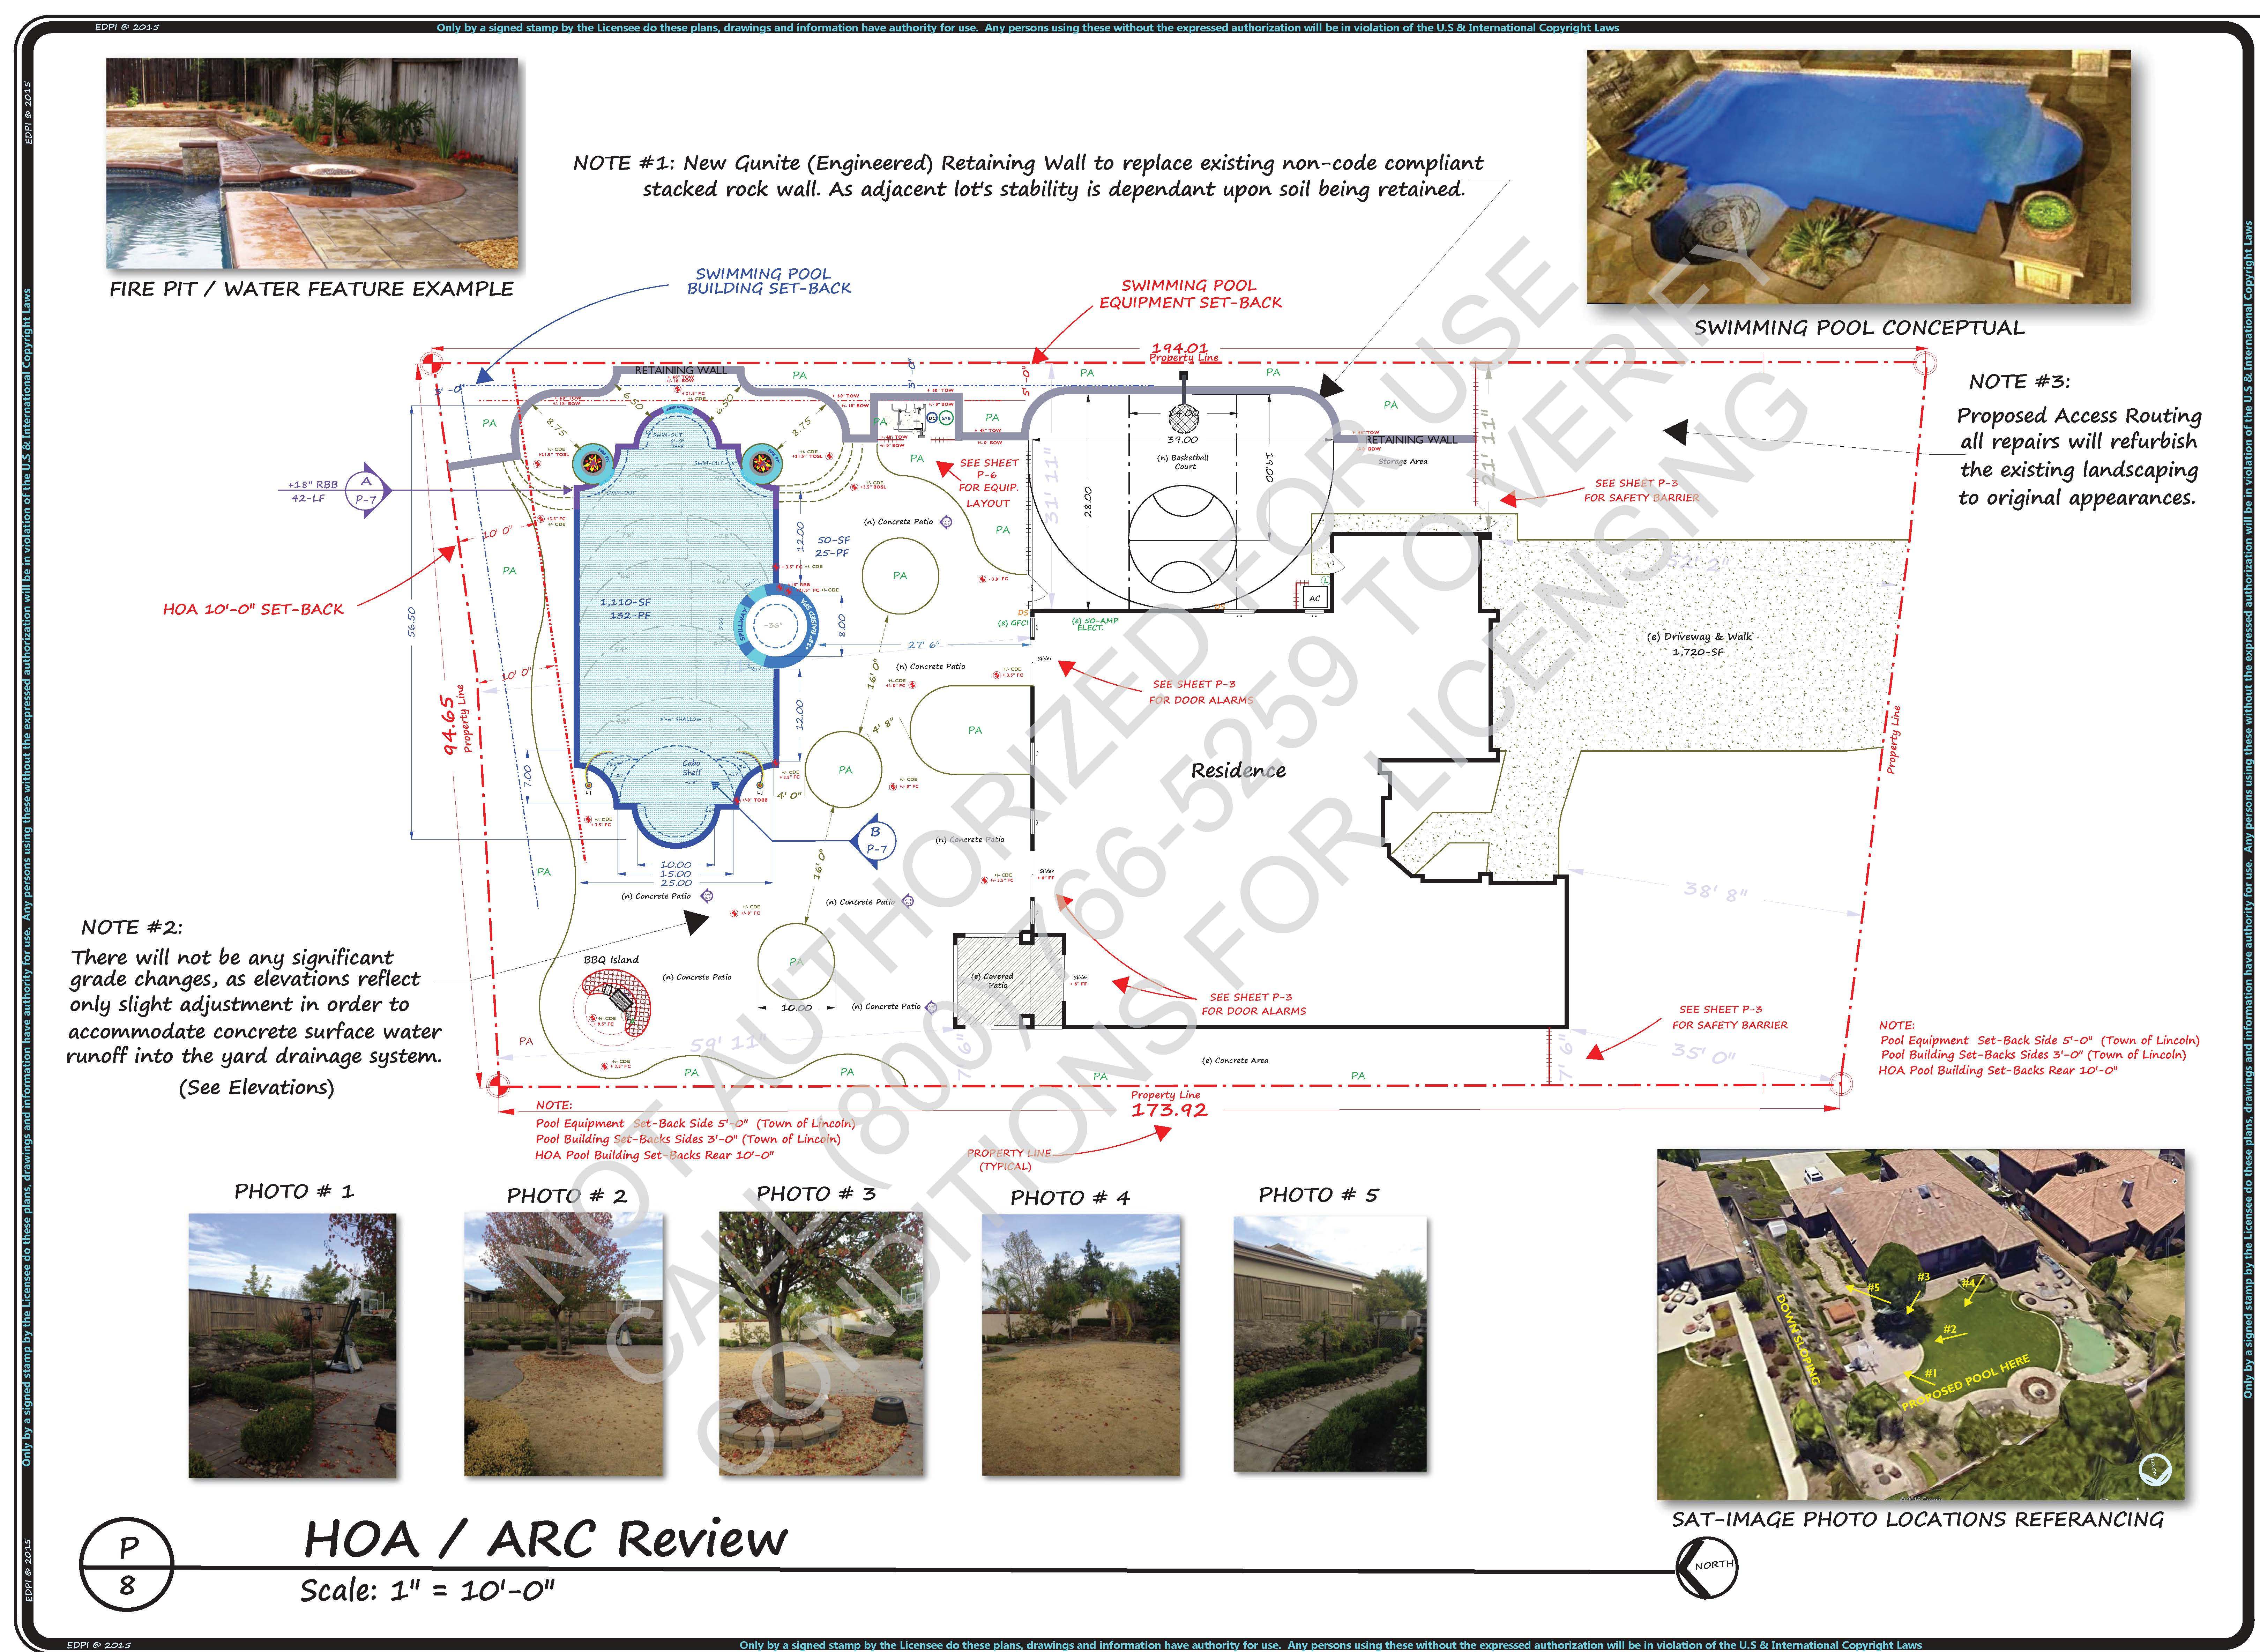 Homeowners Association / Architectural Review